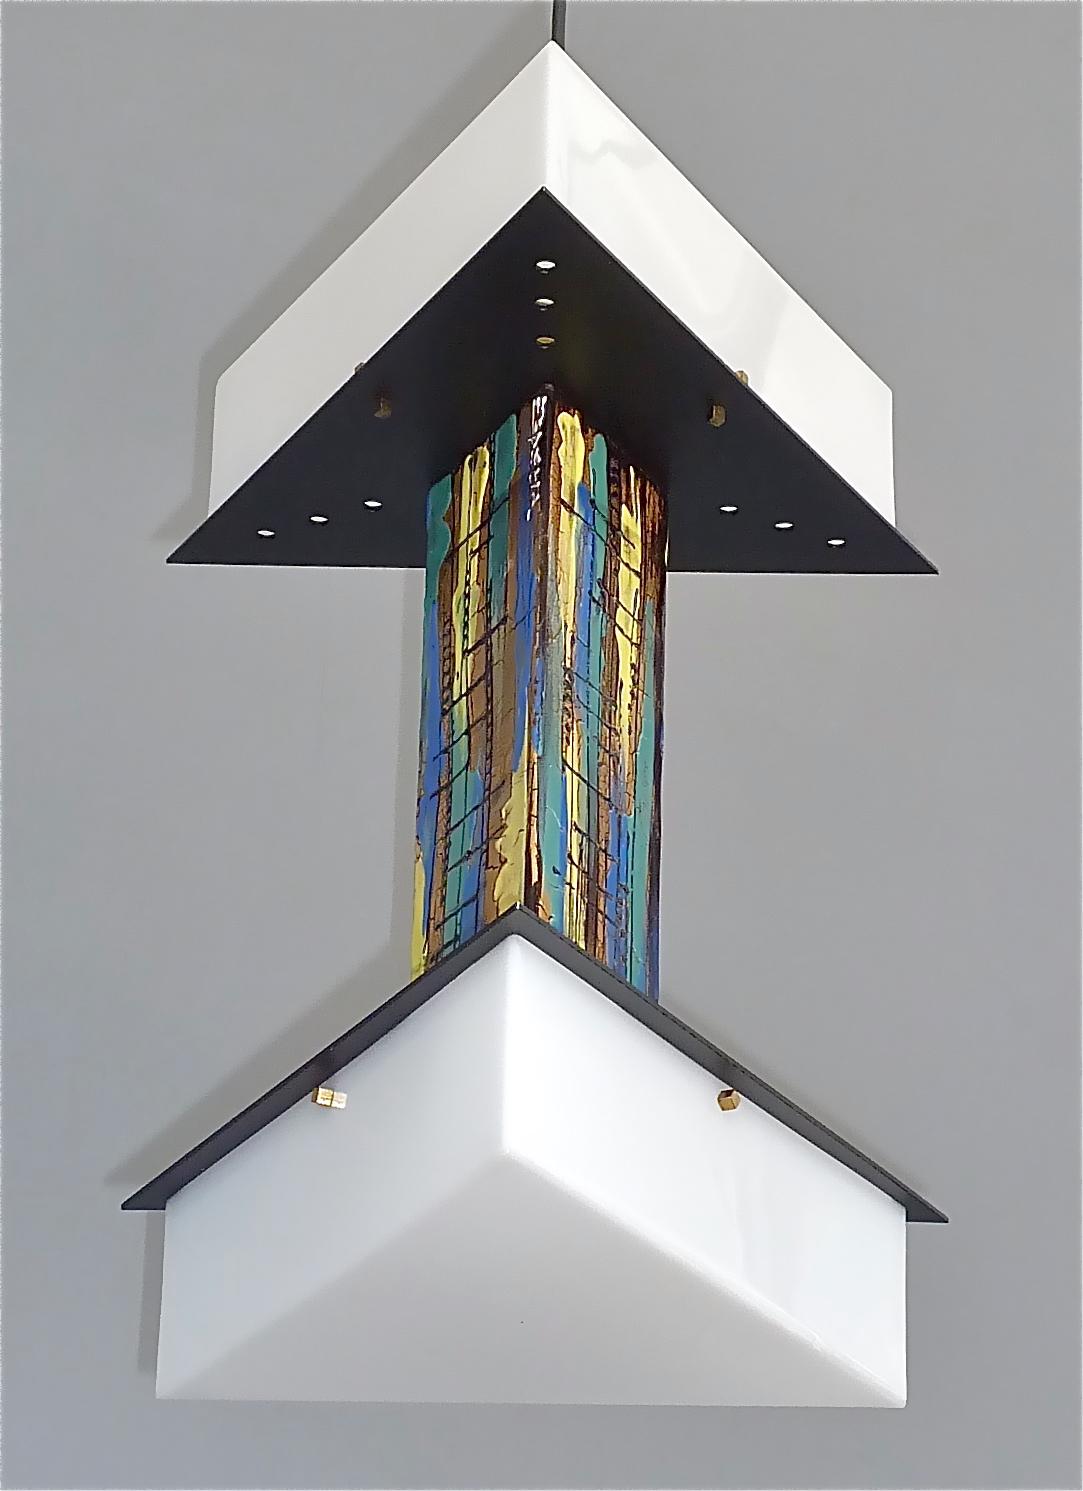 This is No 2 of 2 available. 
Rare signed Italian Mid-century chandelier by Angelo Brotto for Esperia,  Poggibonsi, Italy around 1950s to 1960s. The stunning triangle double-decker chandelier is made of white perspex or acrylic, black plastic, cool